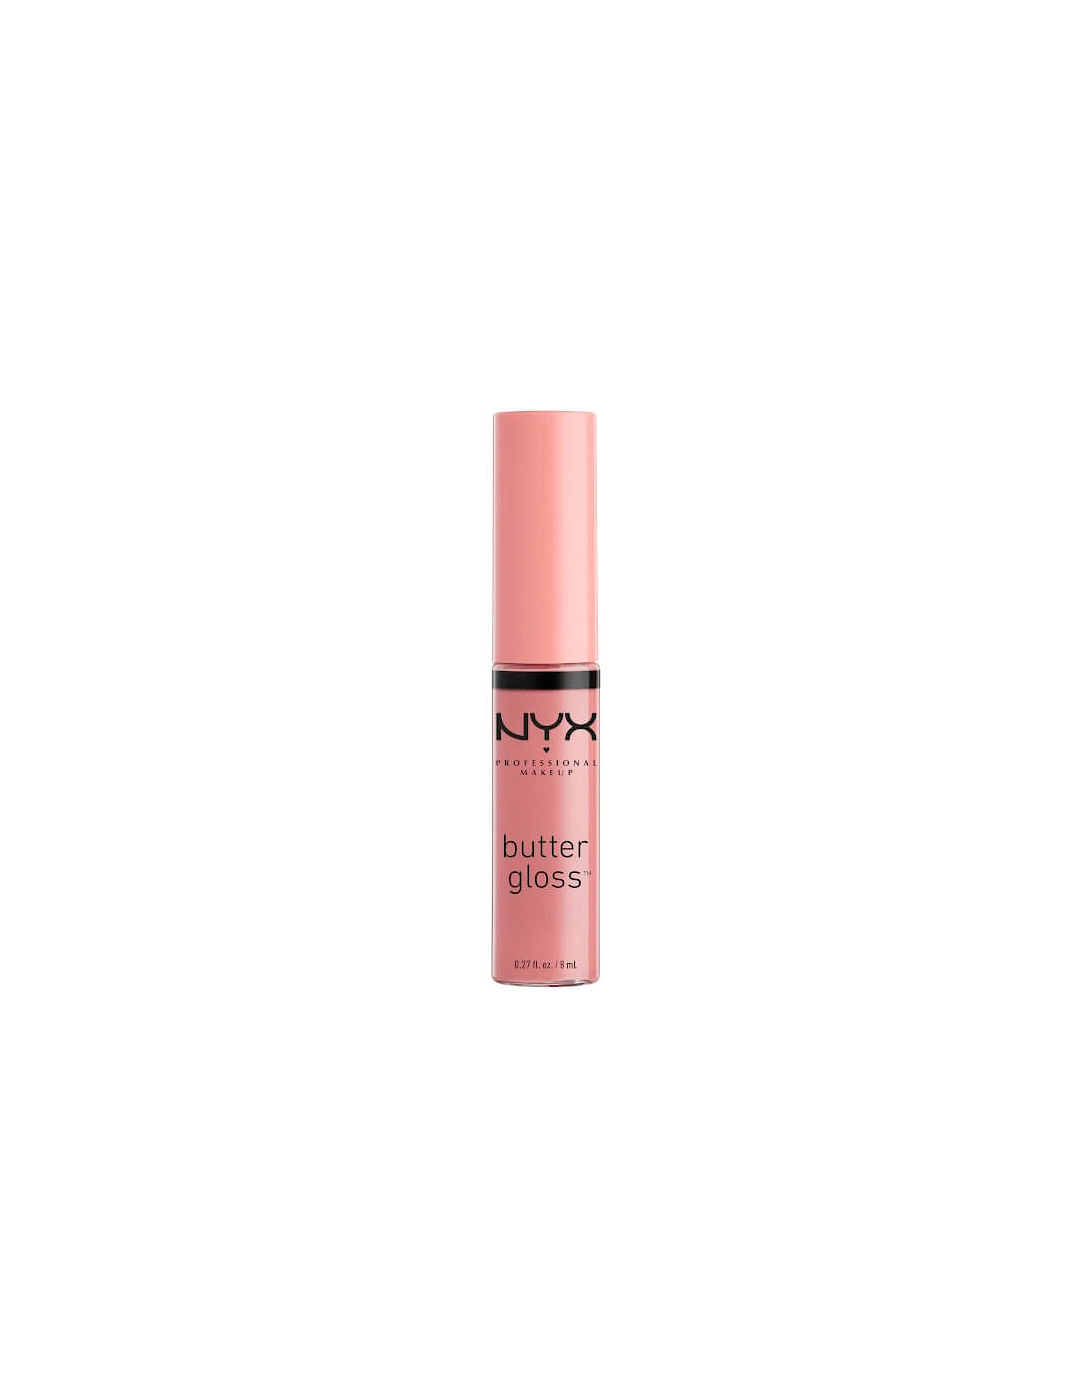 Butter Gloss - Creme Brulee - Natural Pink, 2 of 1